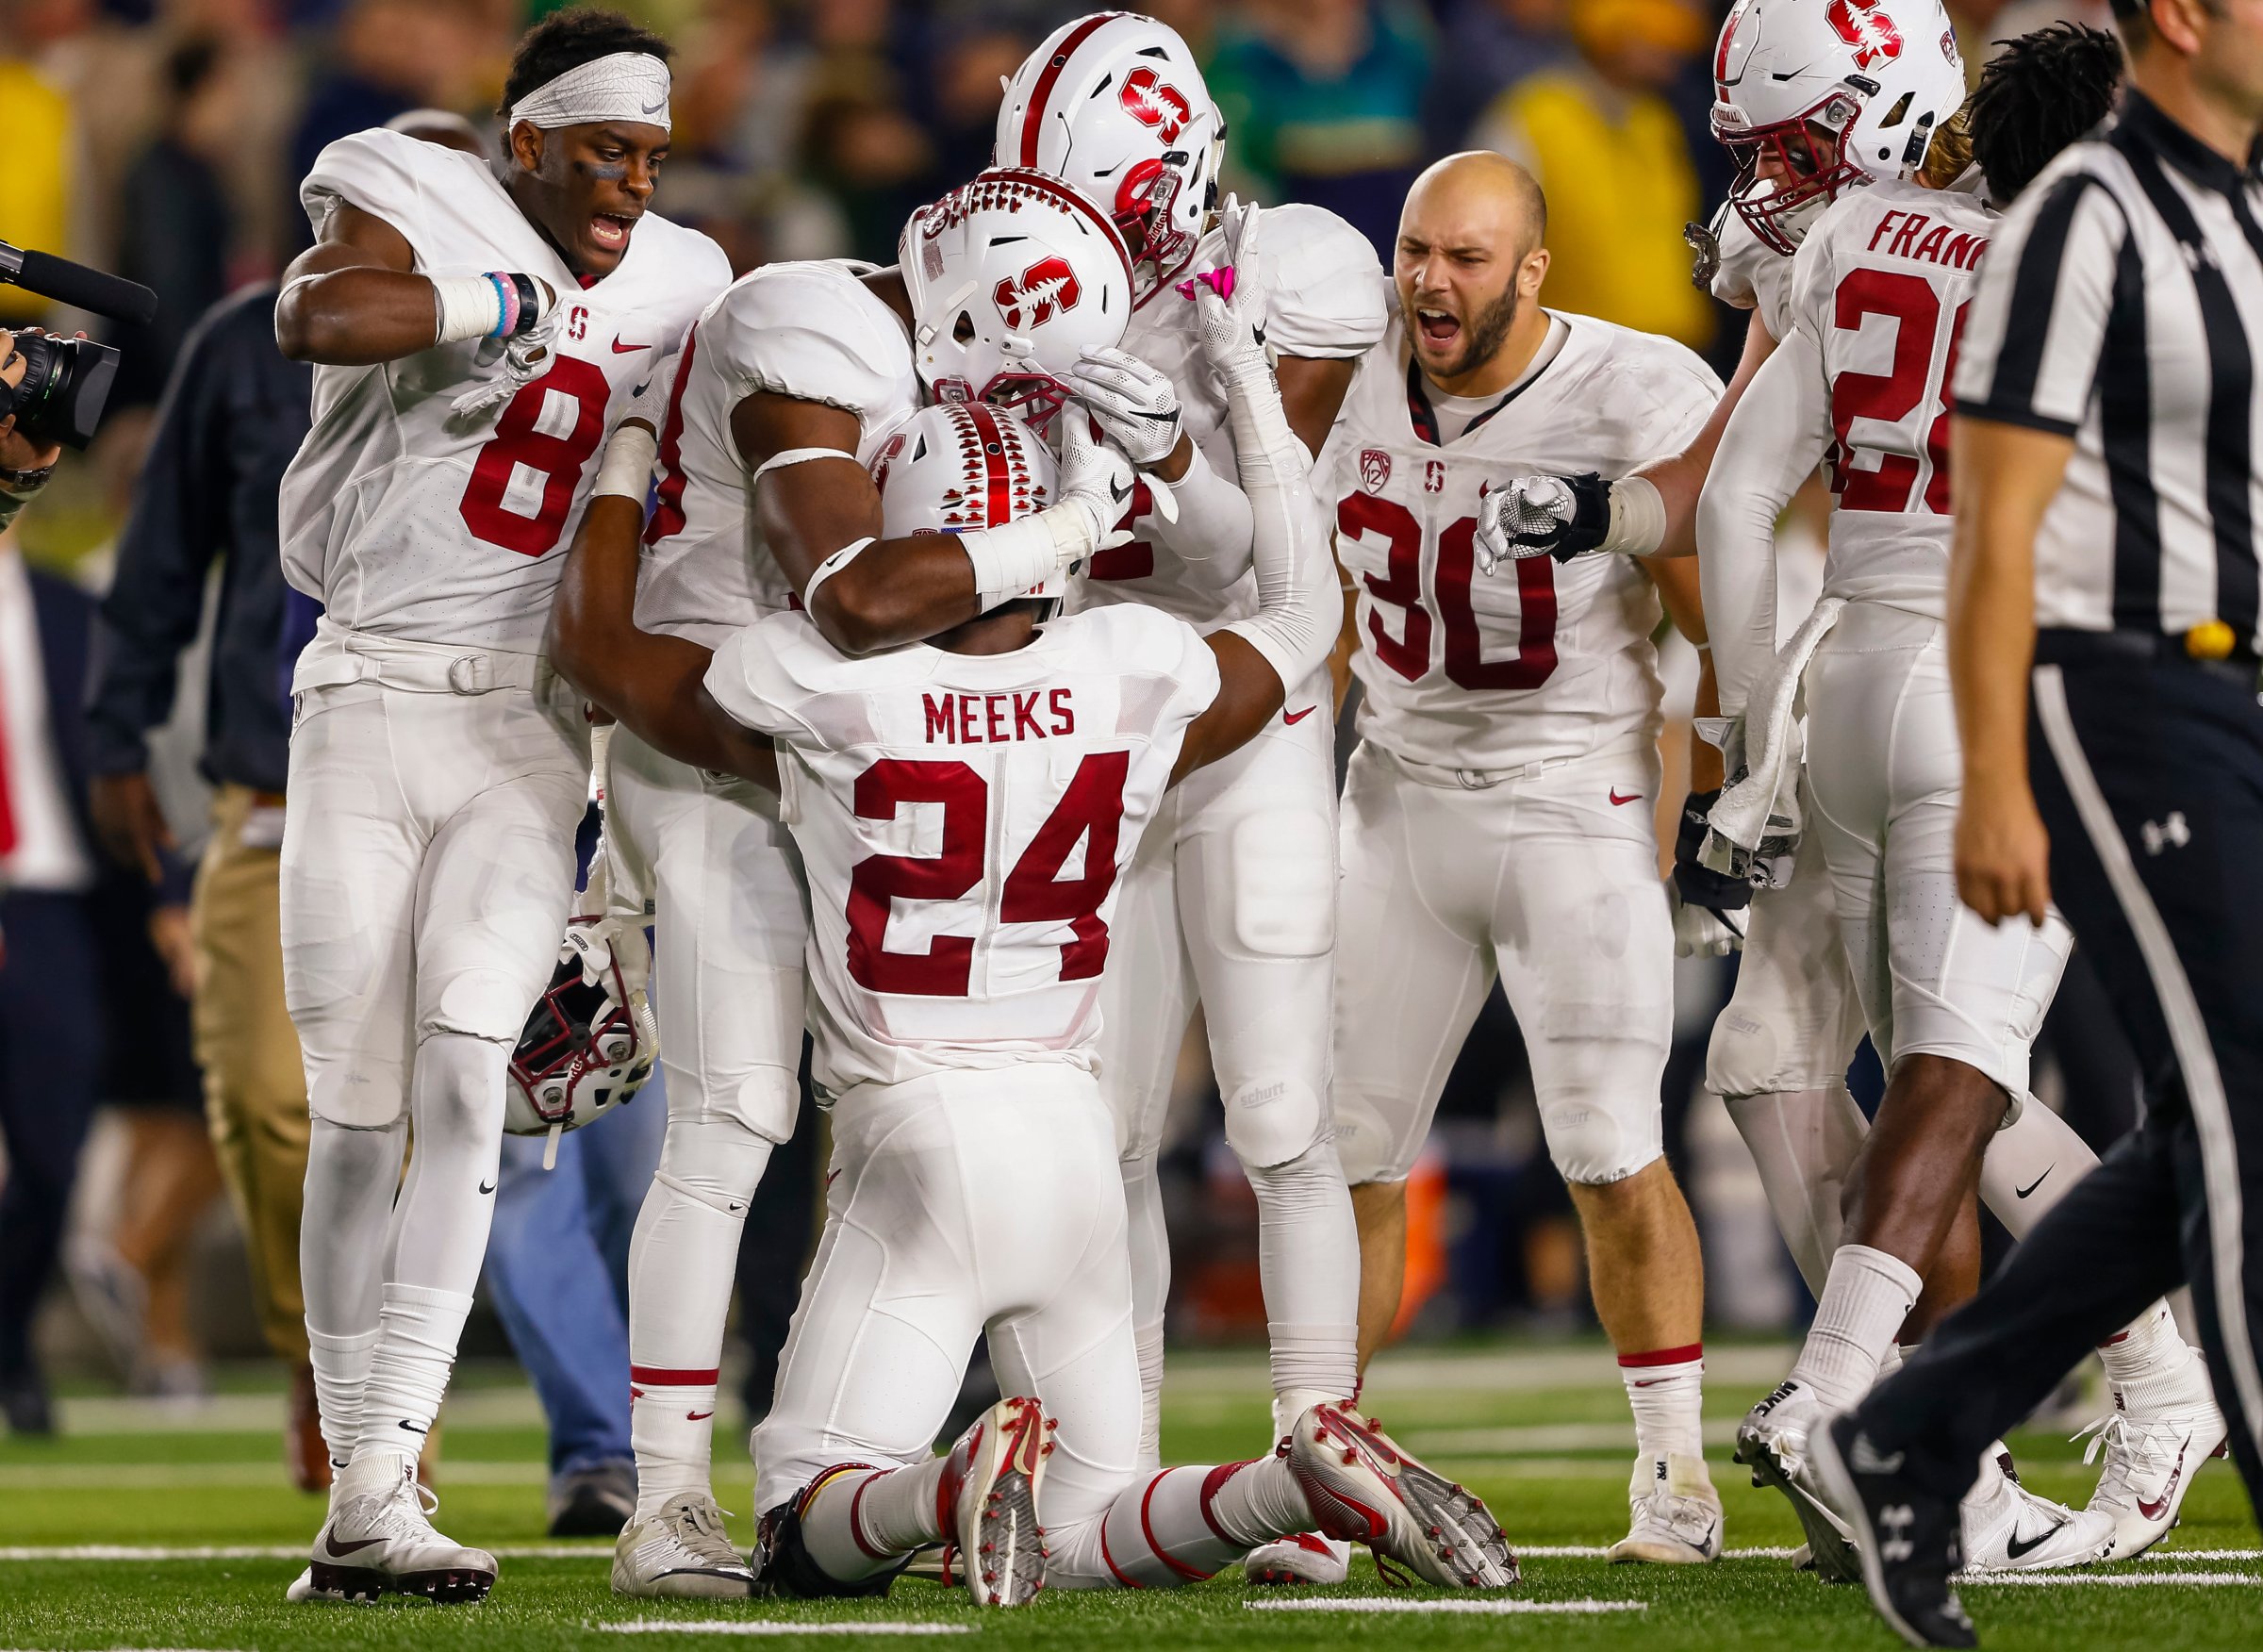 Members of the Stanford Cardinal celebrate after the game against the Notre Dame Fighting Irish at Notre Dame Stadium on Oct. 15, 2016 in South Bend, Indiana.